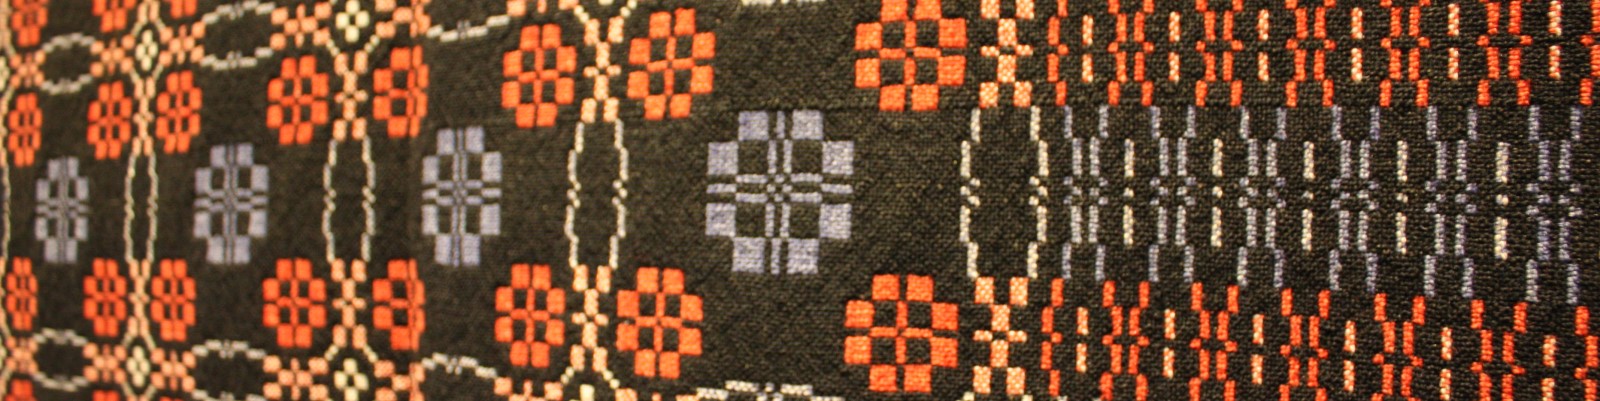 Welsh blankets from the collection of Jane Beck